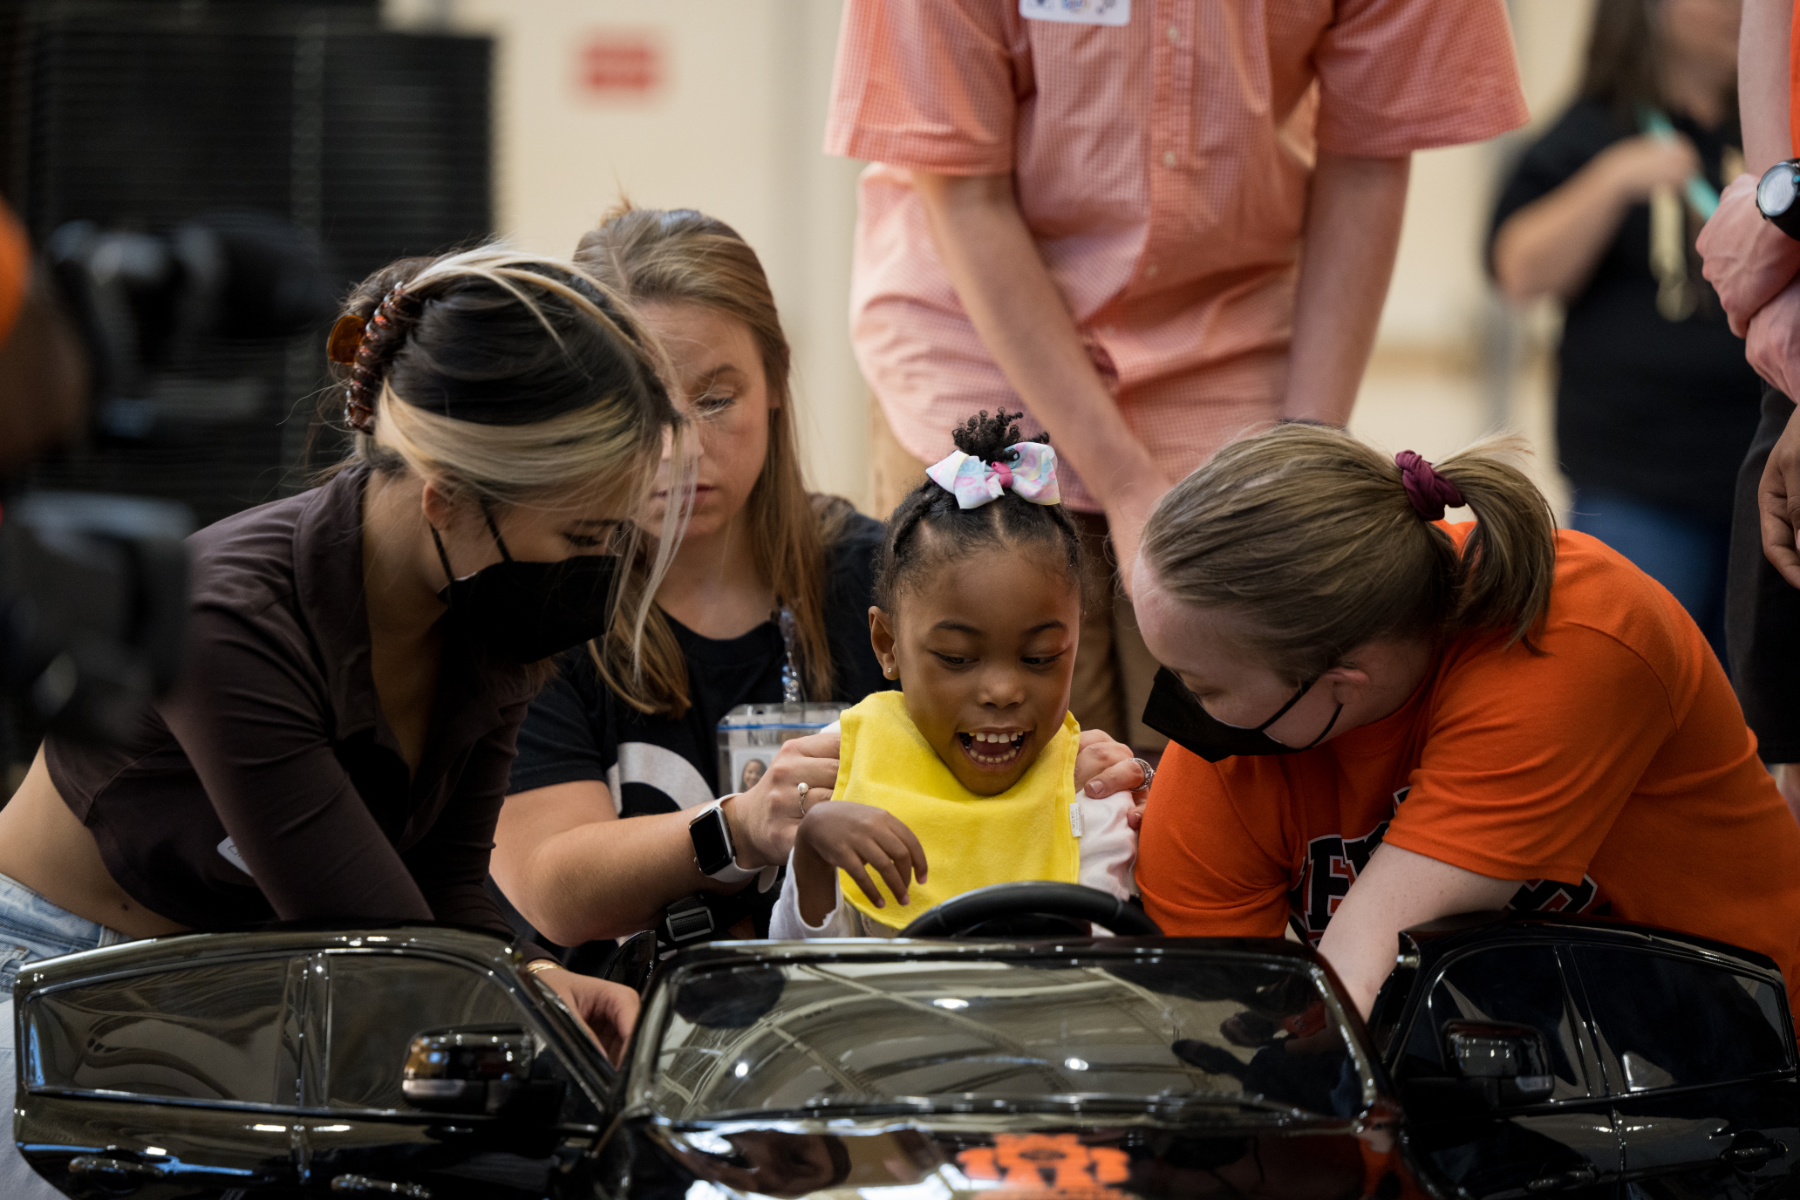 Mercer to host ‘Go Baby Go’ build for kids with limited mobility